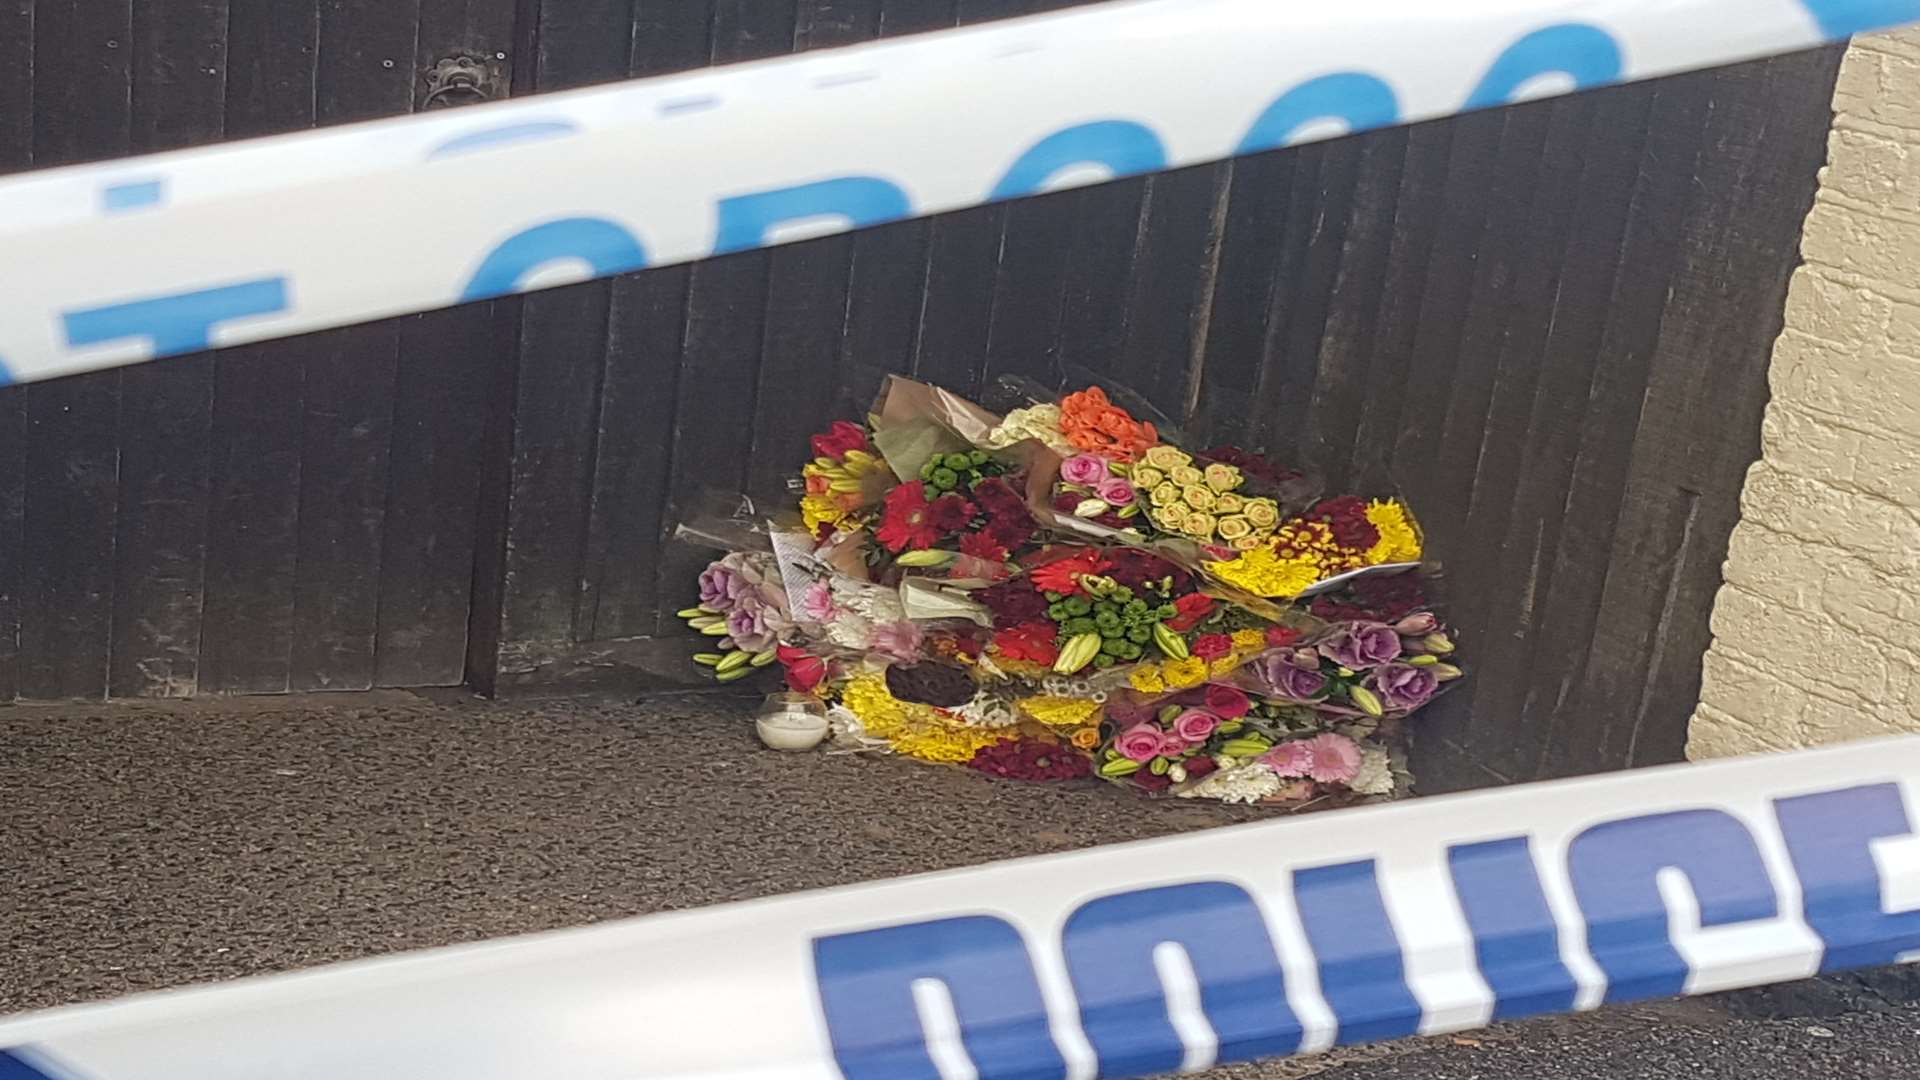 Floral tributes at the scene of the shooting